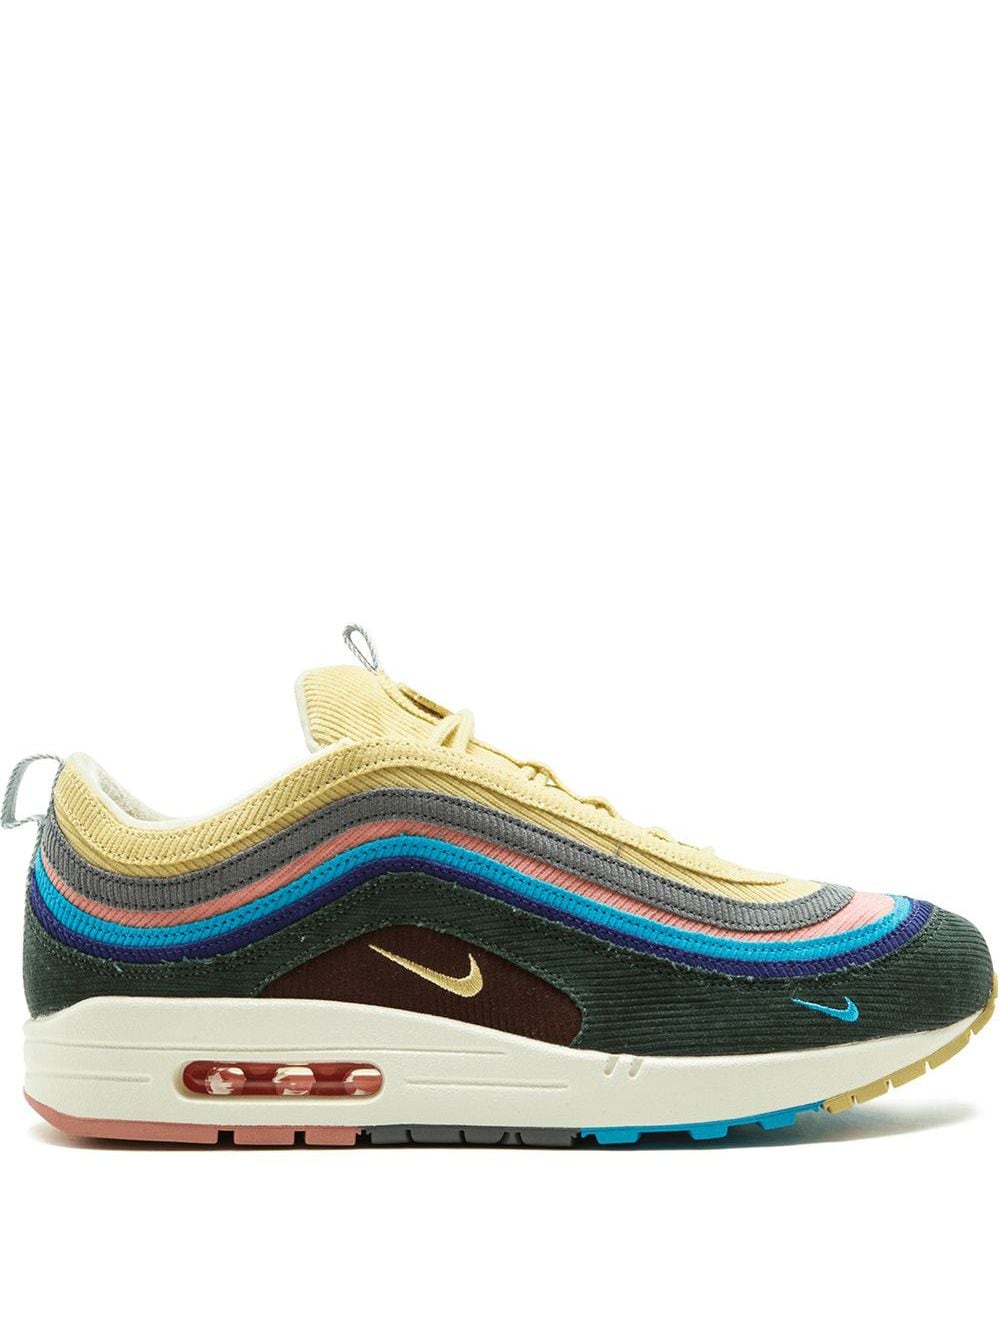 Nike x Sean Wotherspoon Air Max 1/97 VF SW sneakers - Green von Nike